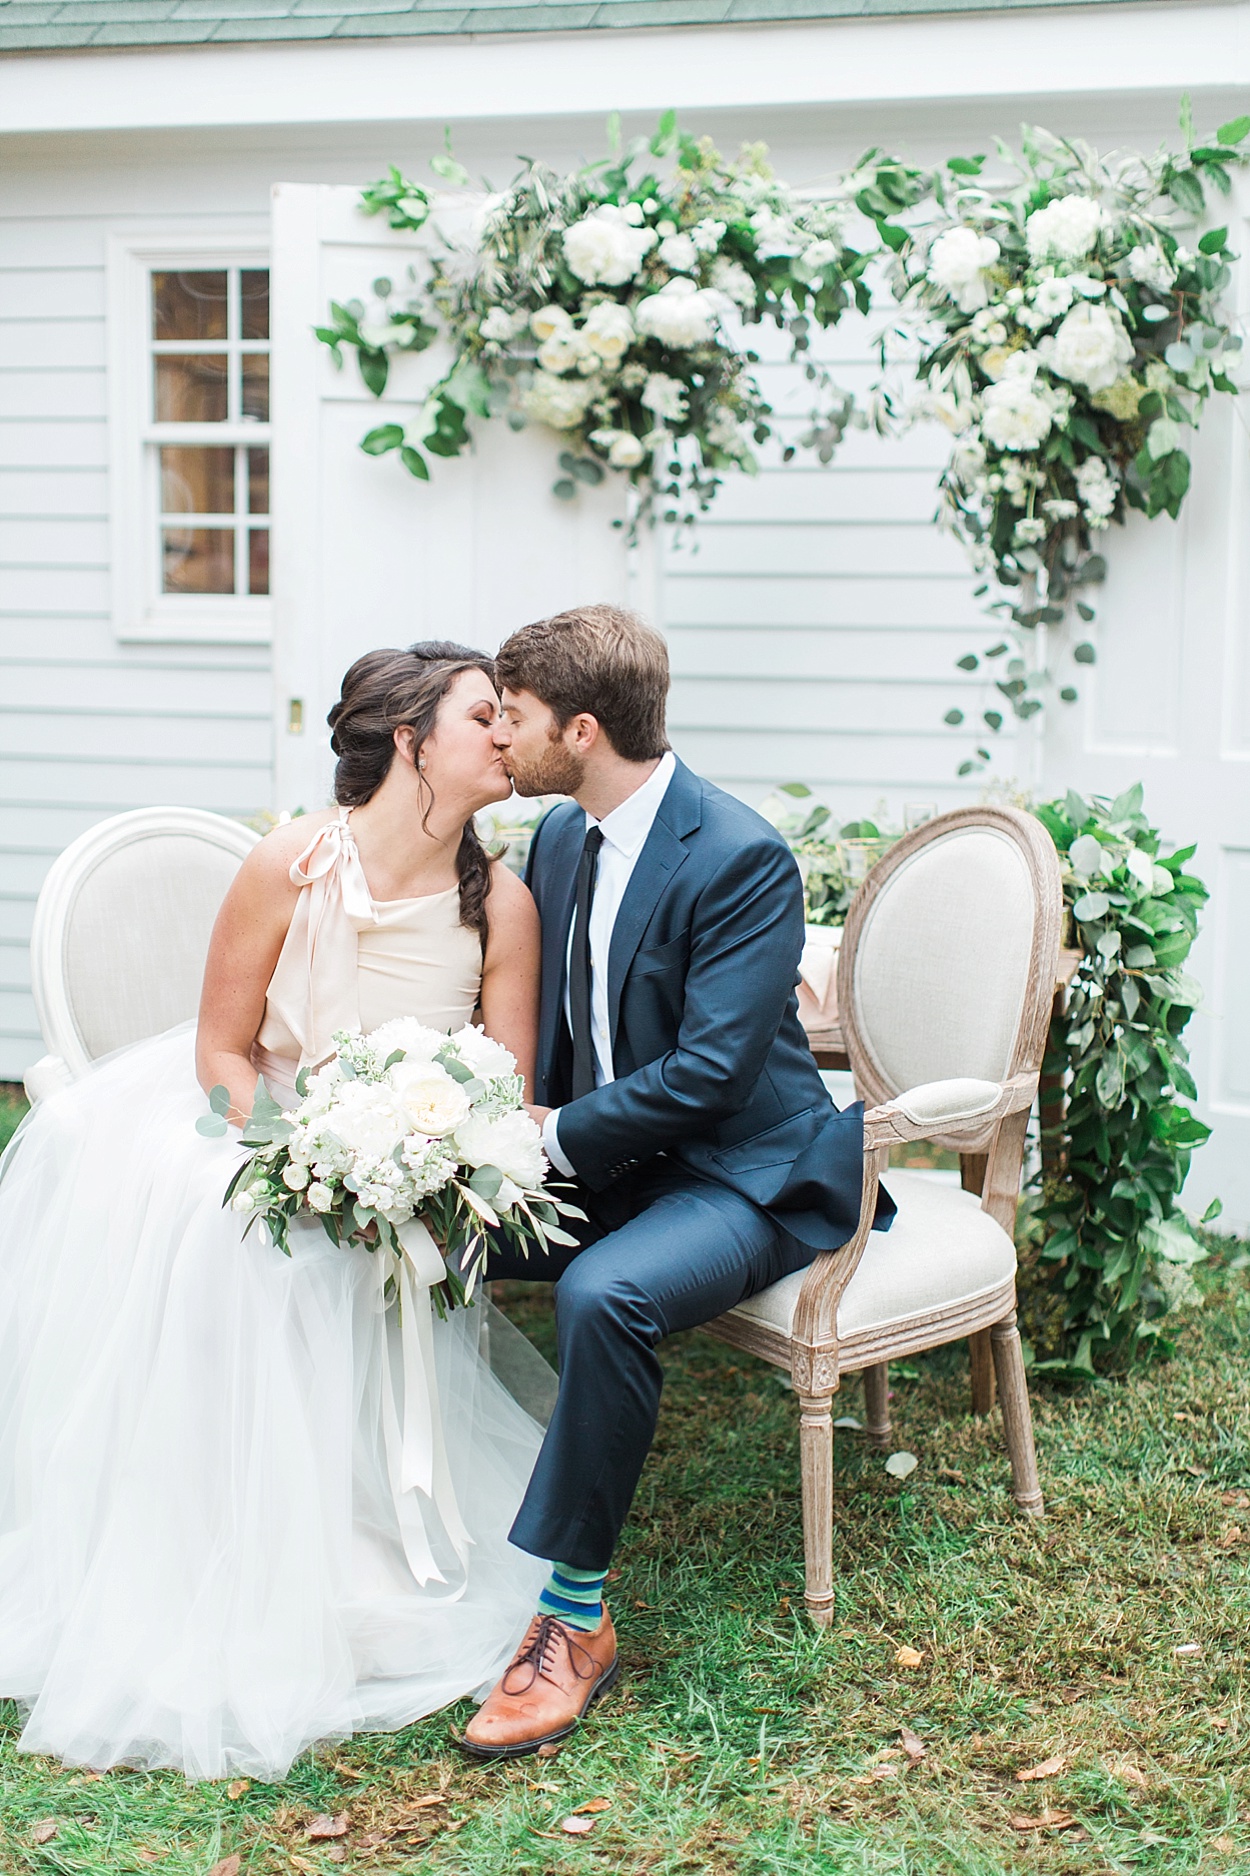 French styled wedding shoot with blush + soft green | Dear Sweetheart Events + Abby Grace Photography